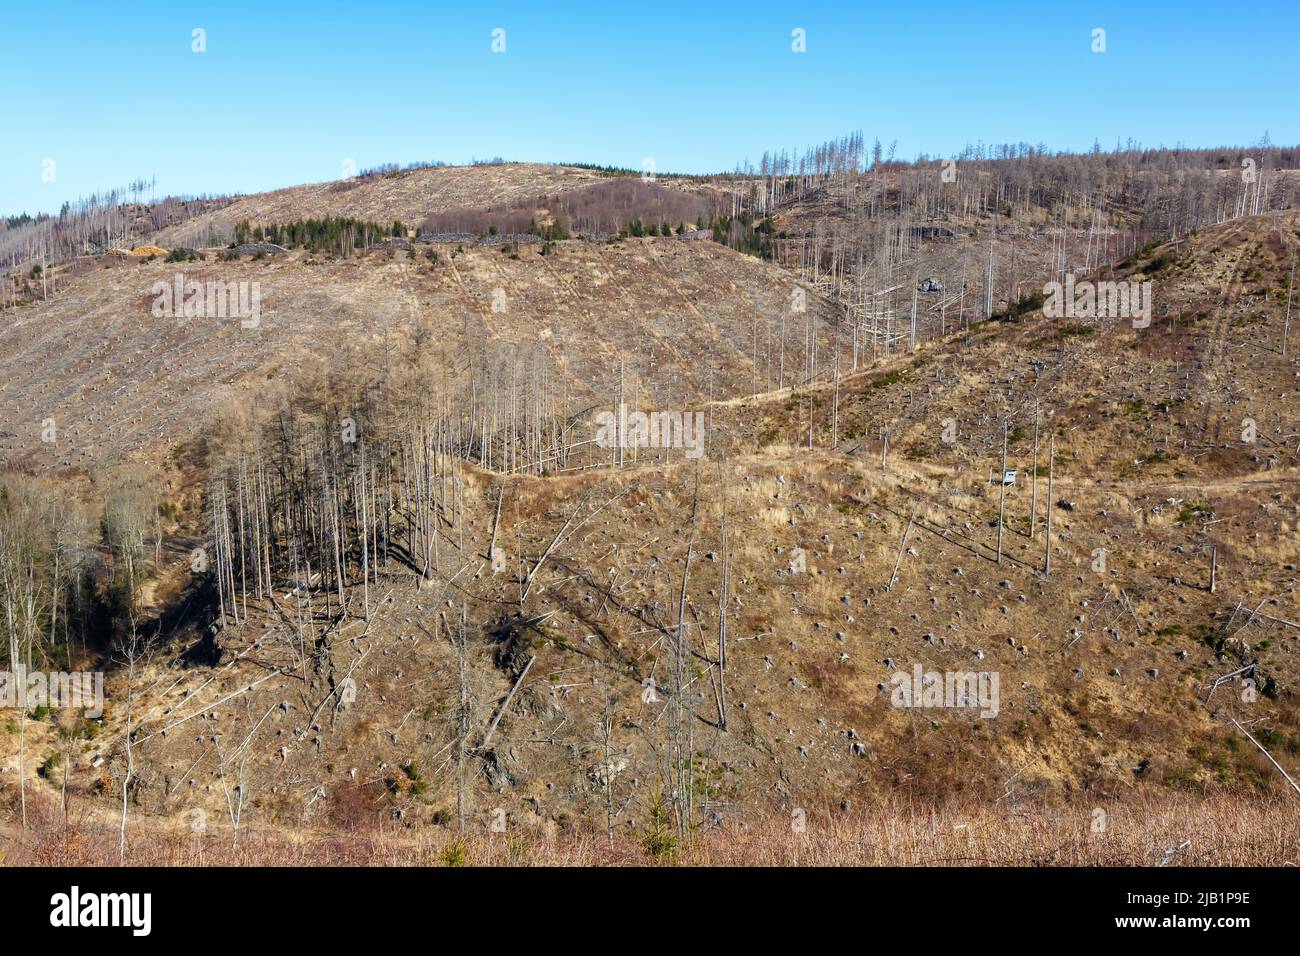 Environmental destruction climate change crisis environment landscape nature woods forest dieback at Brocken mountain in Harz, Germany Stock Photo